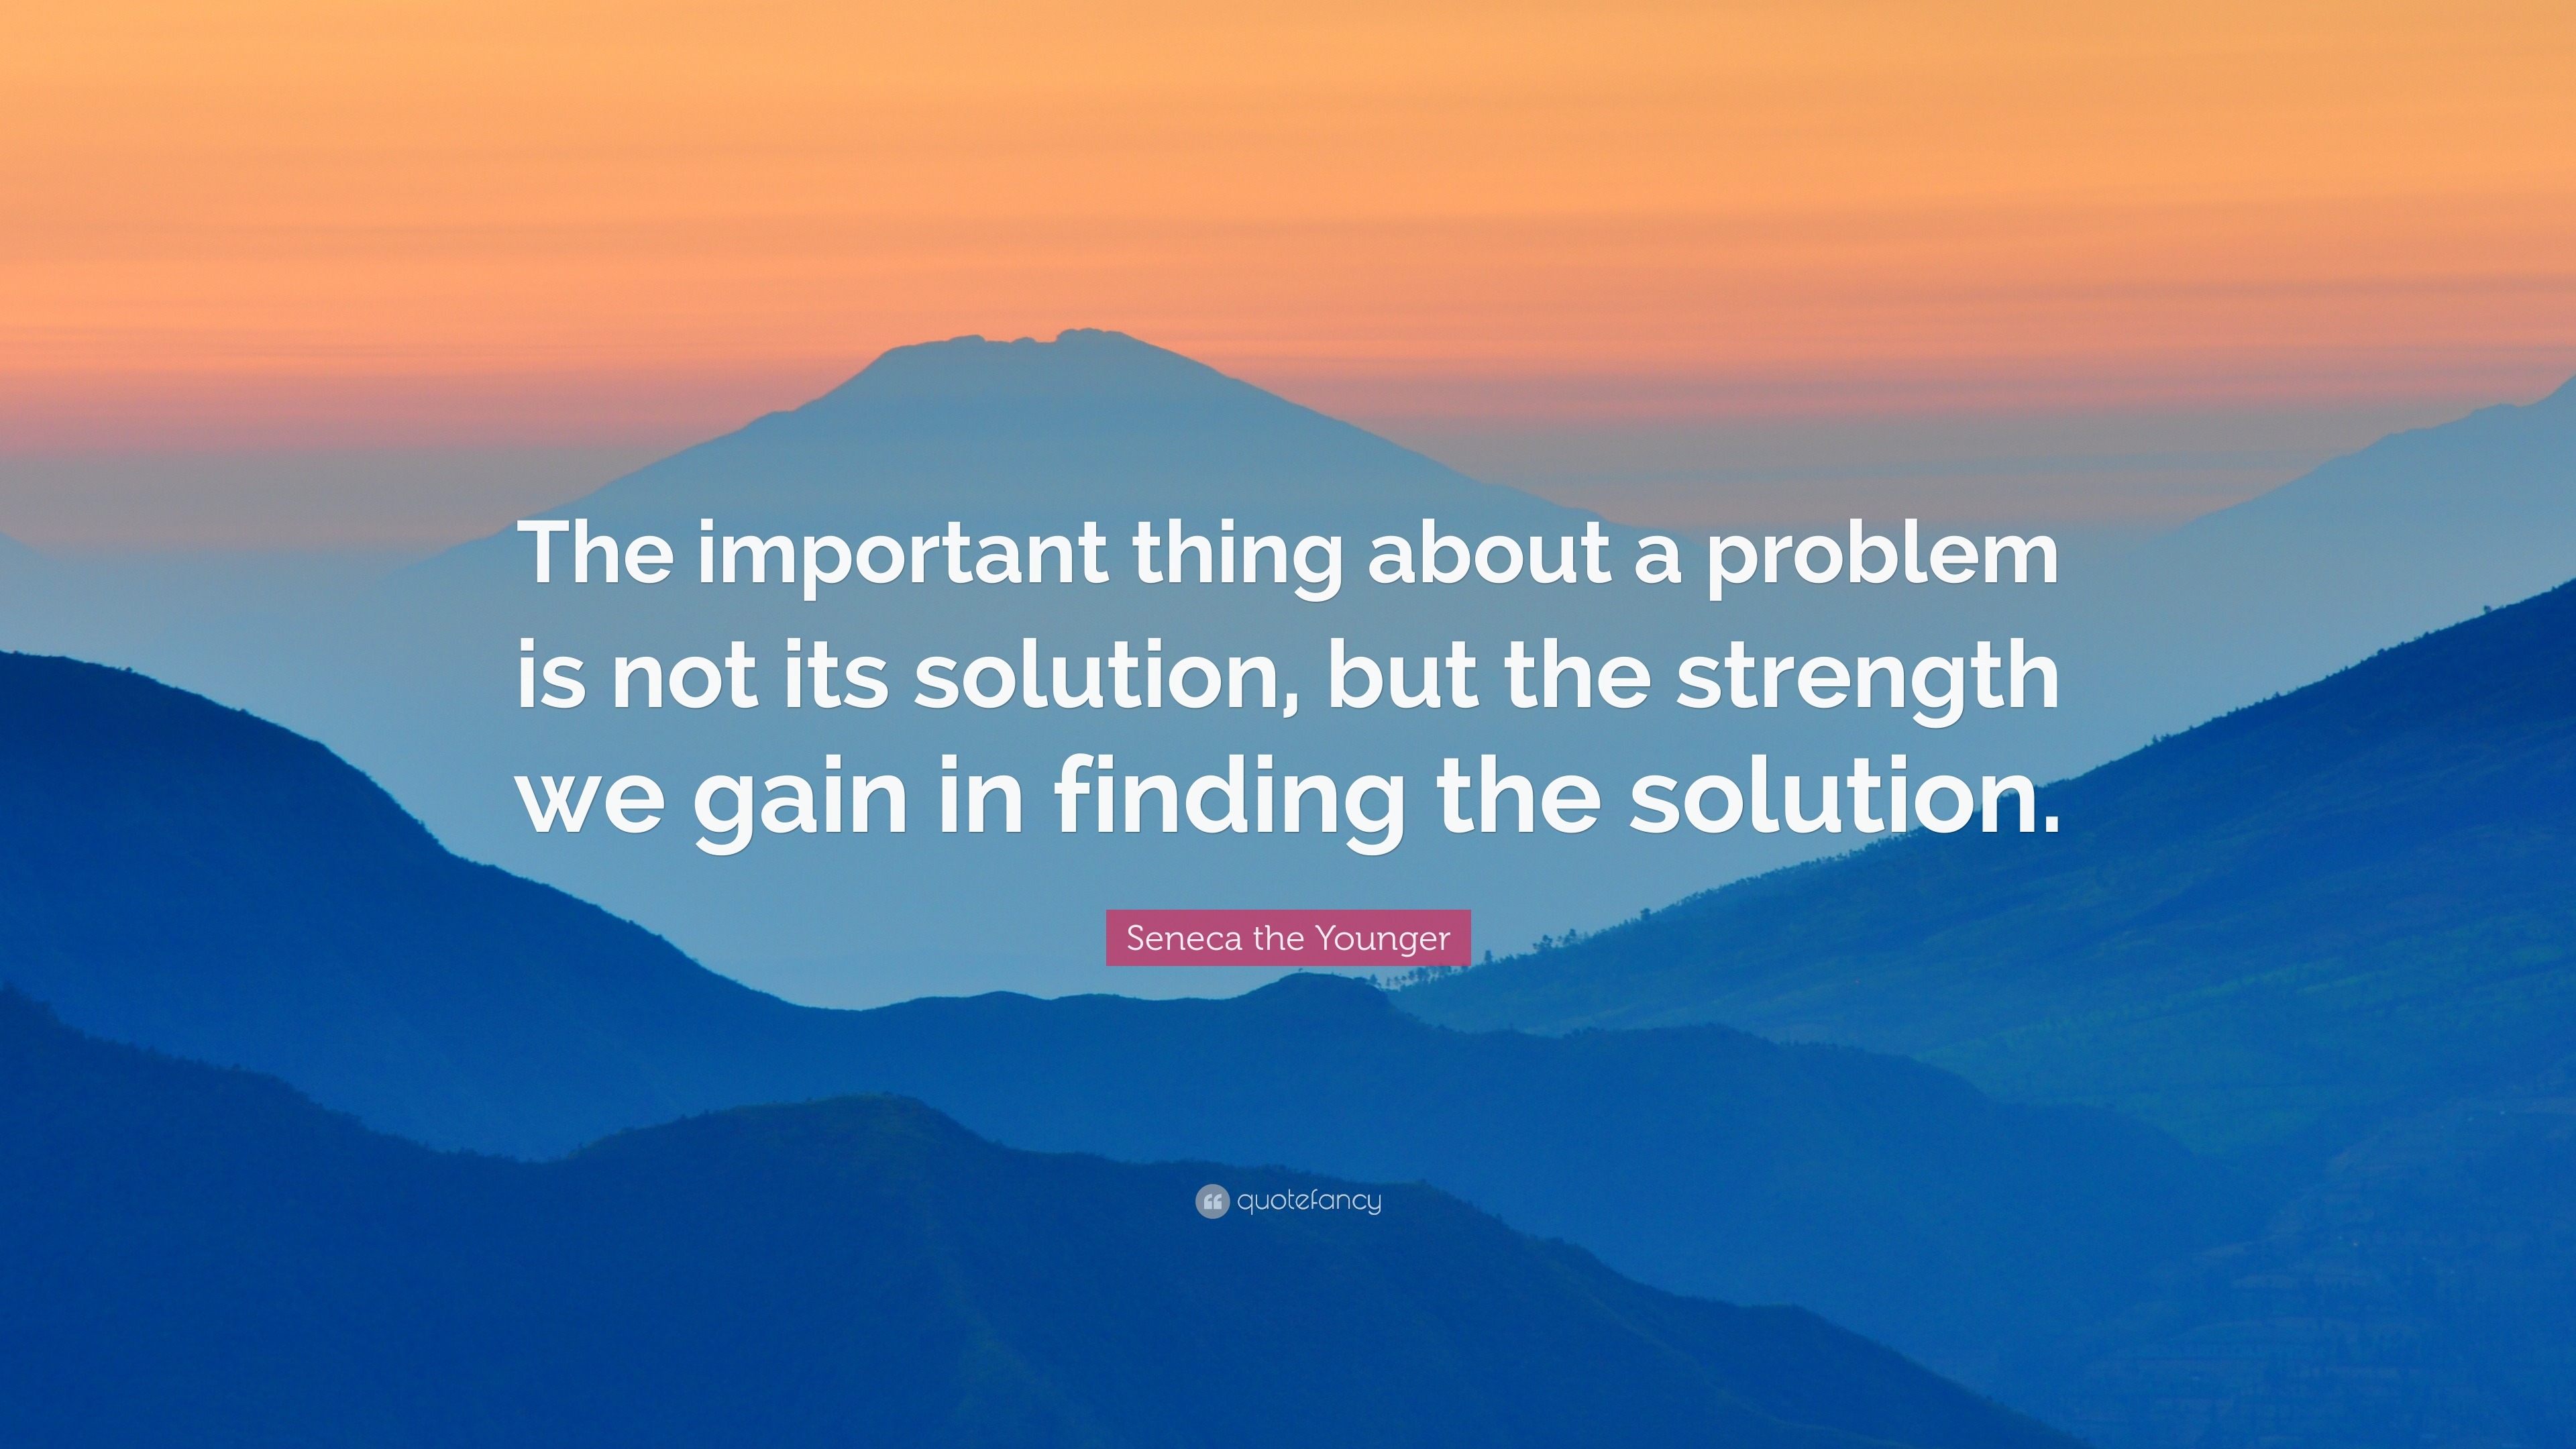 Seneca the Younger Quote: “The important thing about a problem is not